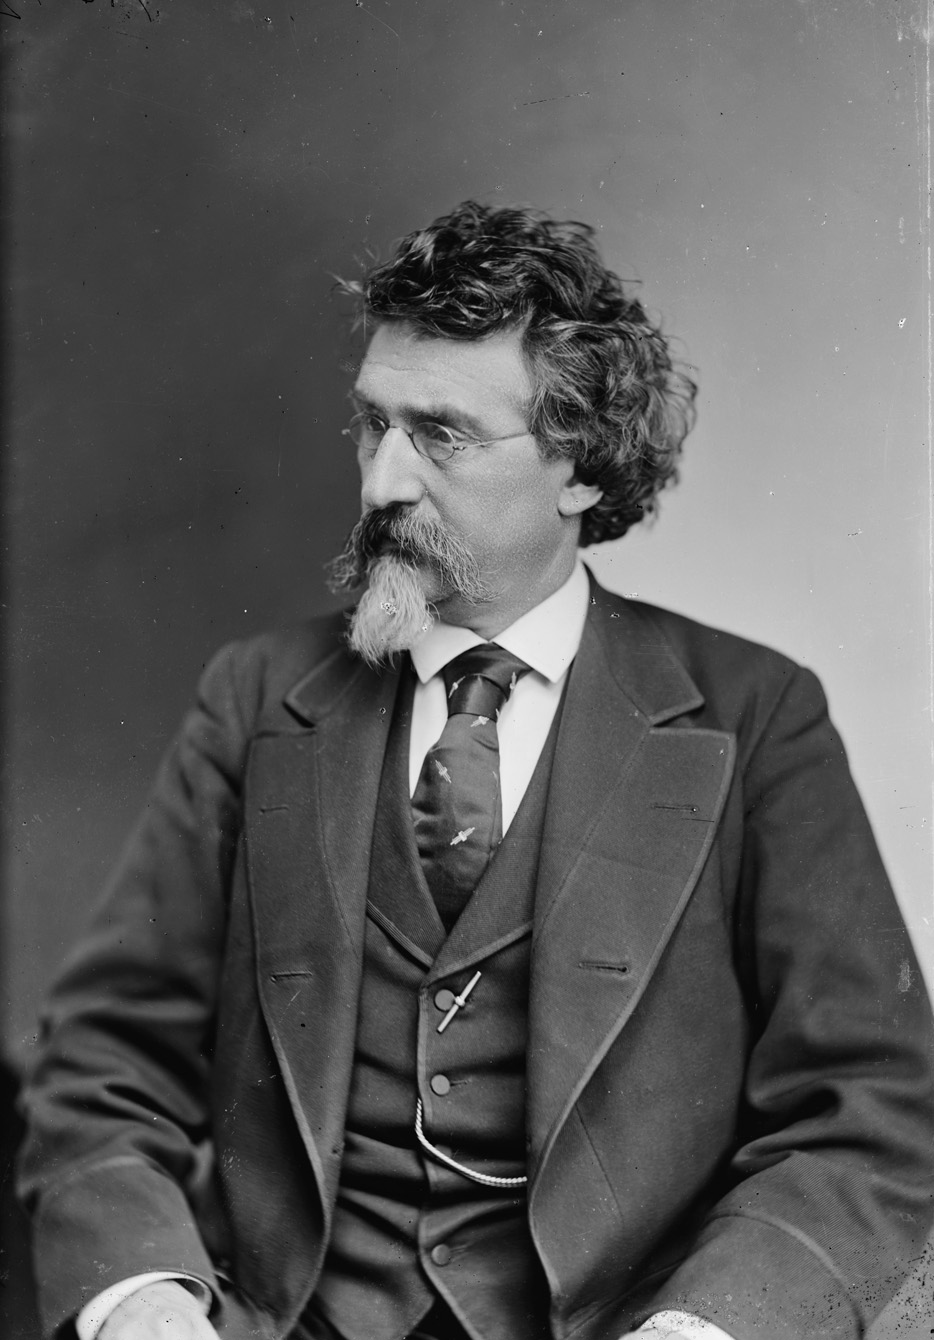 Mathew Brady in 1875, 10 years after the Civil War.